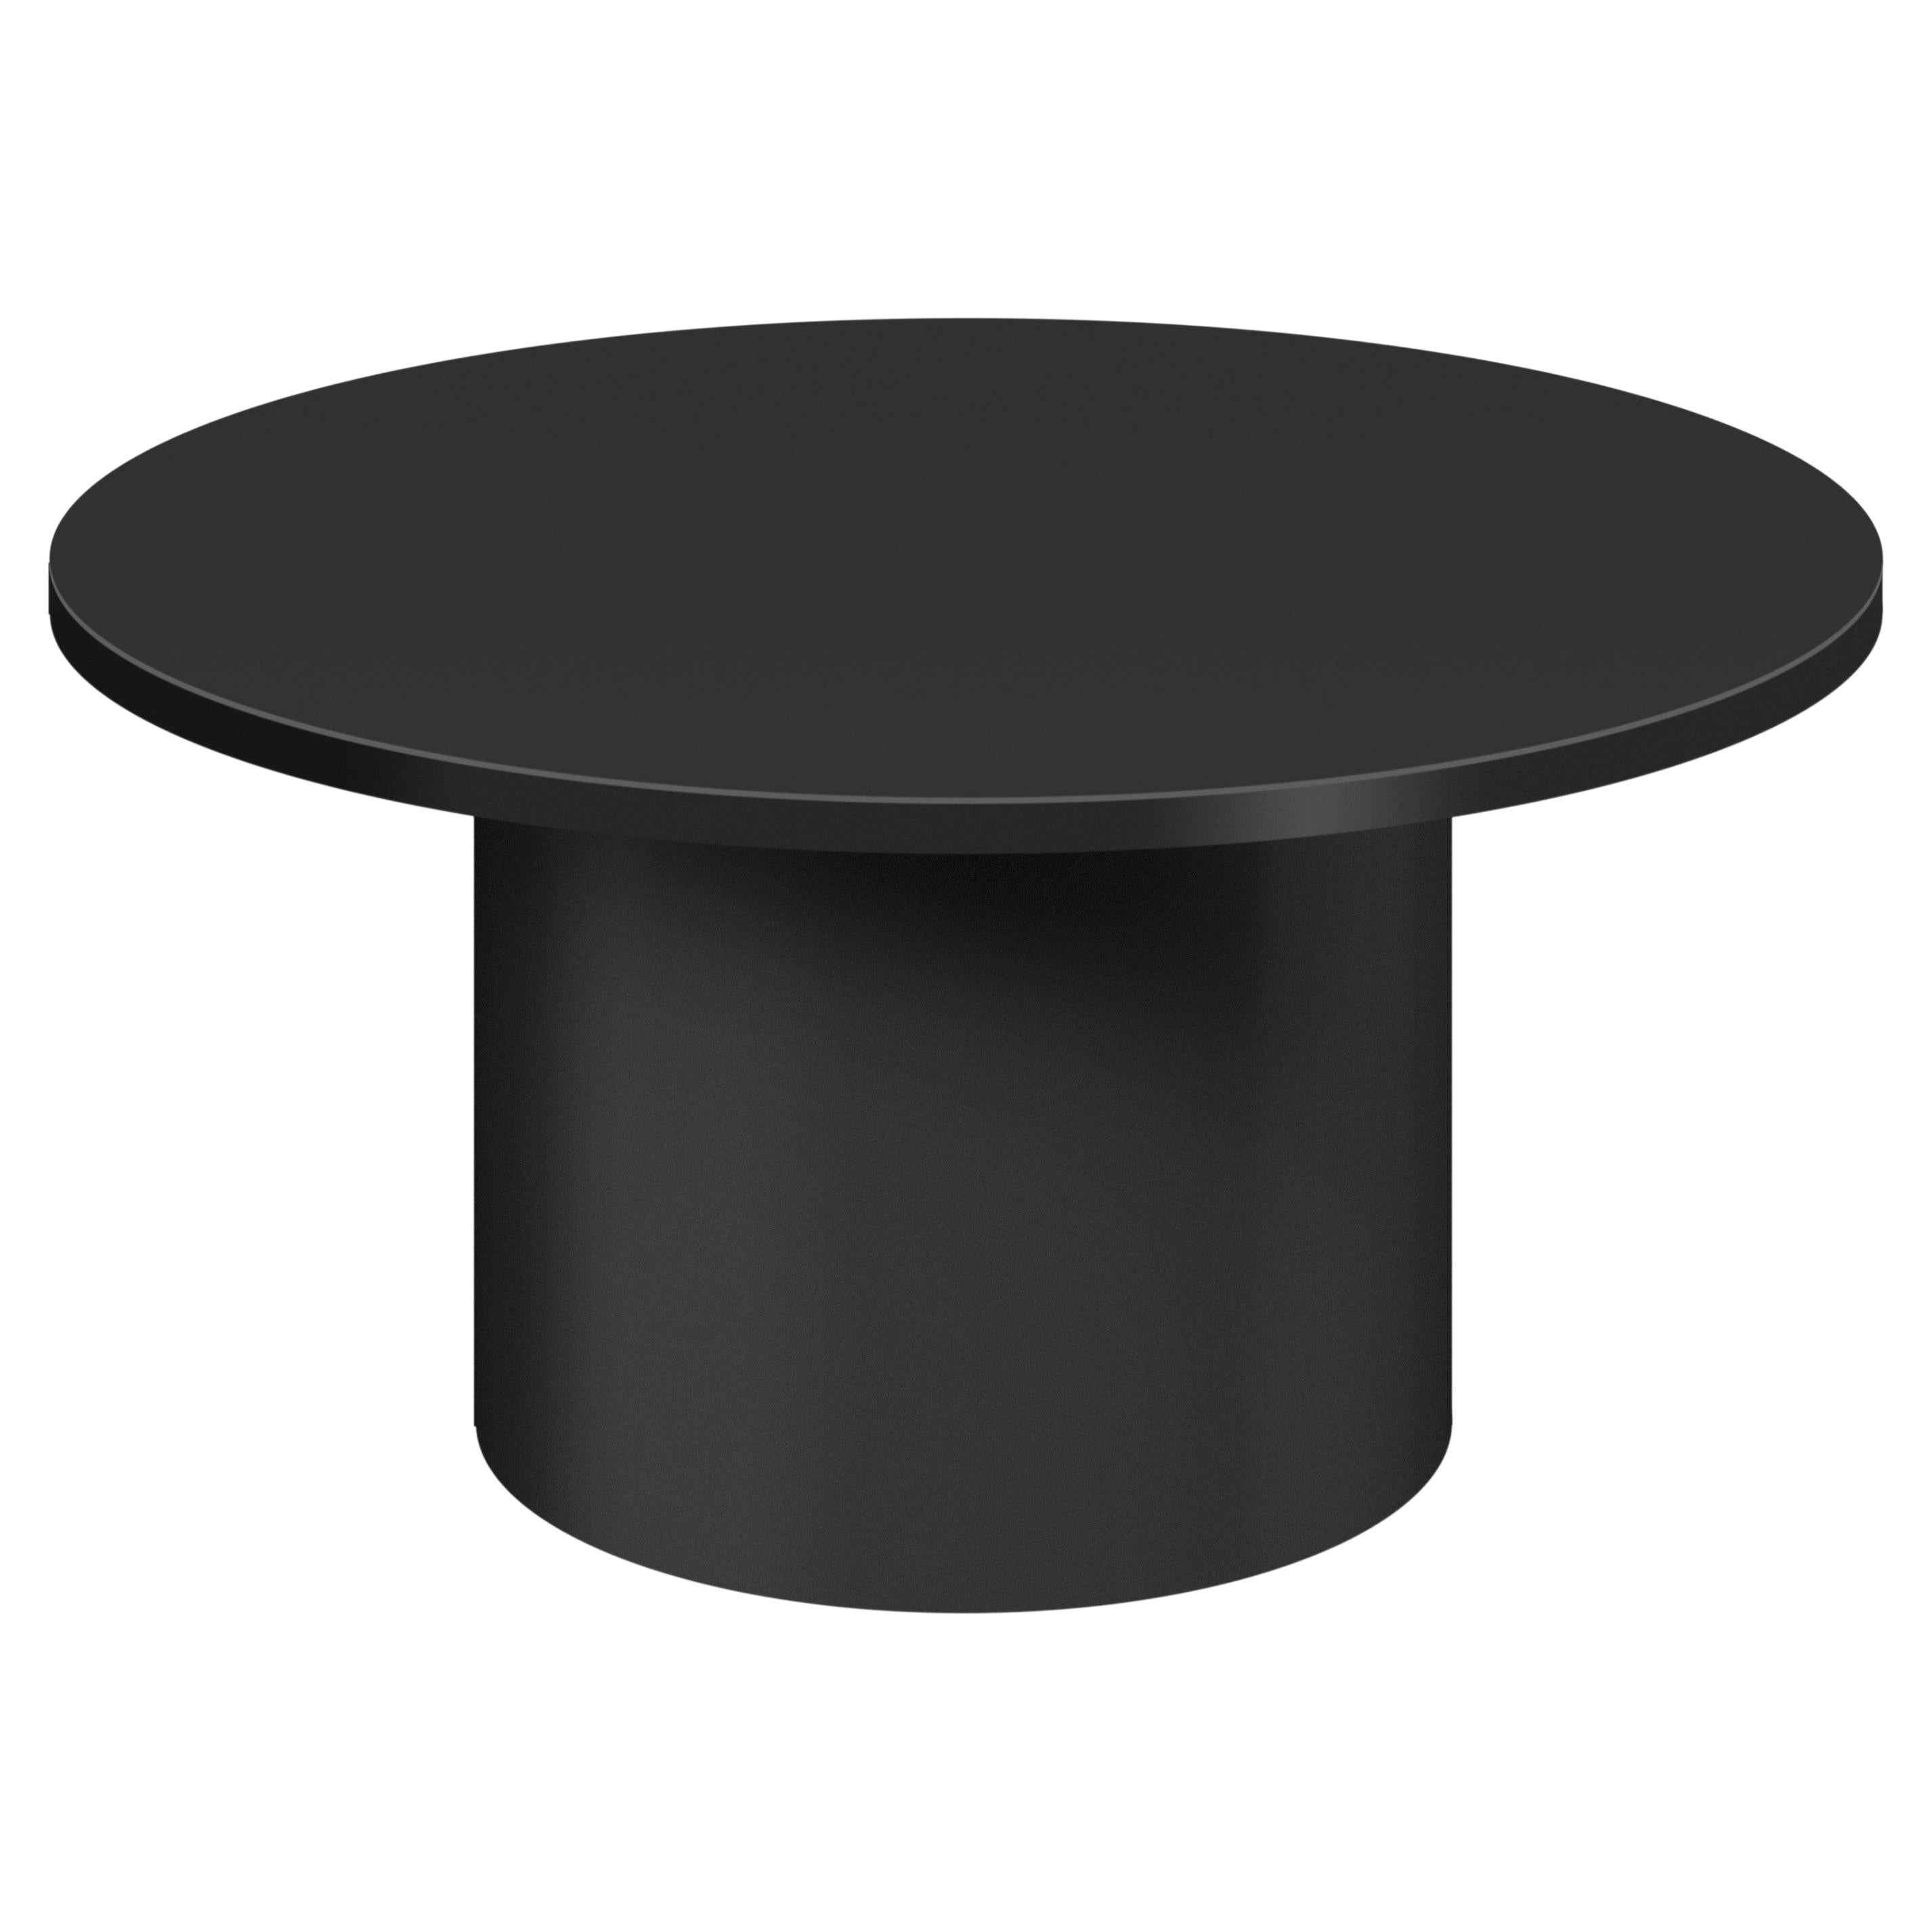 E15 Enoki Low Metal Black Side Table Designed by Philipp Mainzer